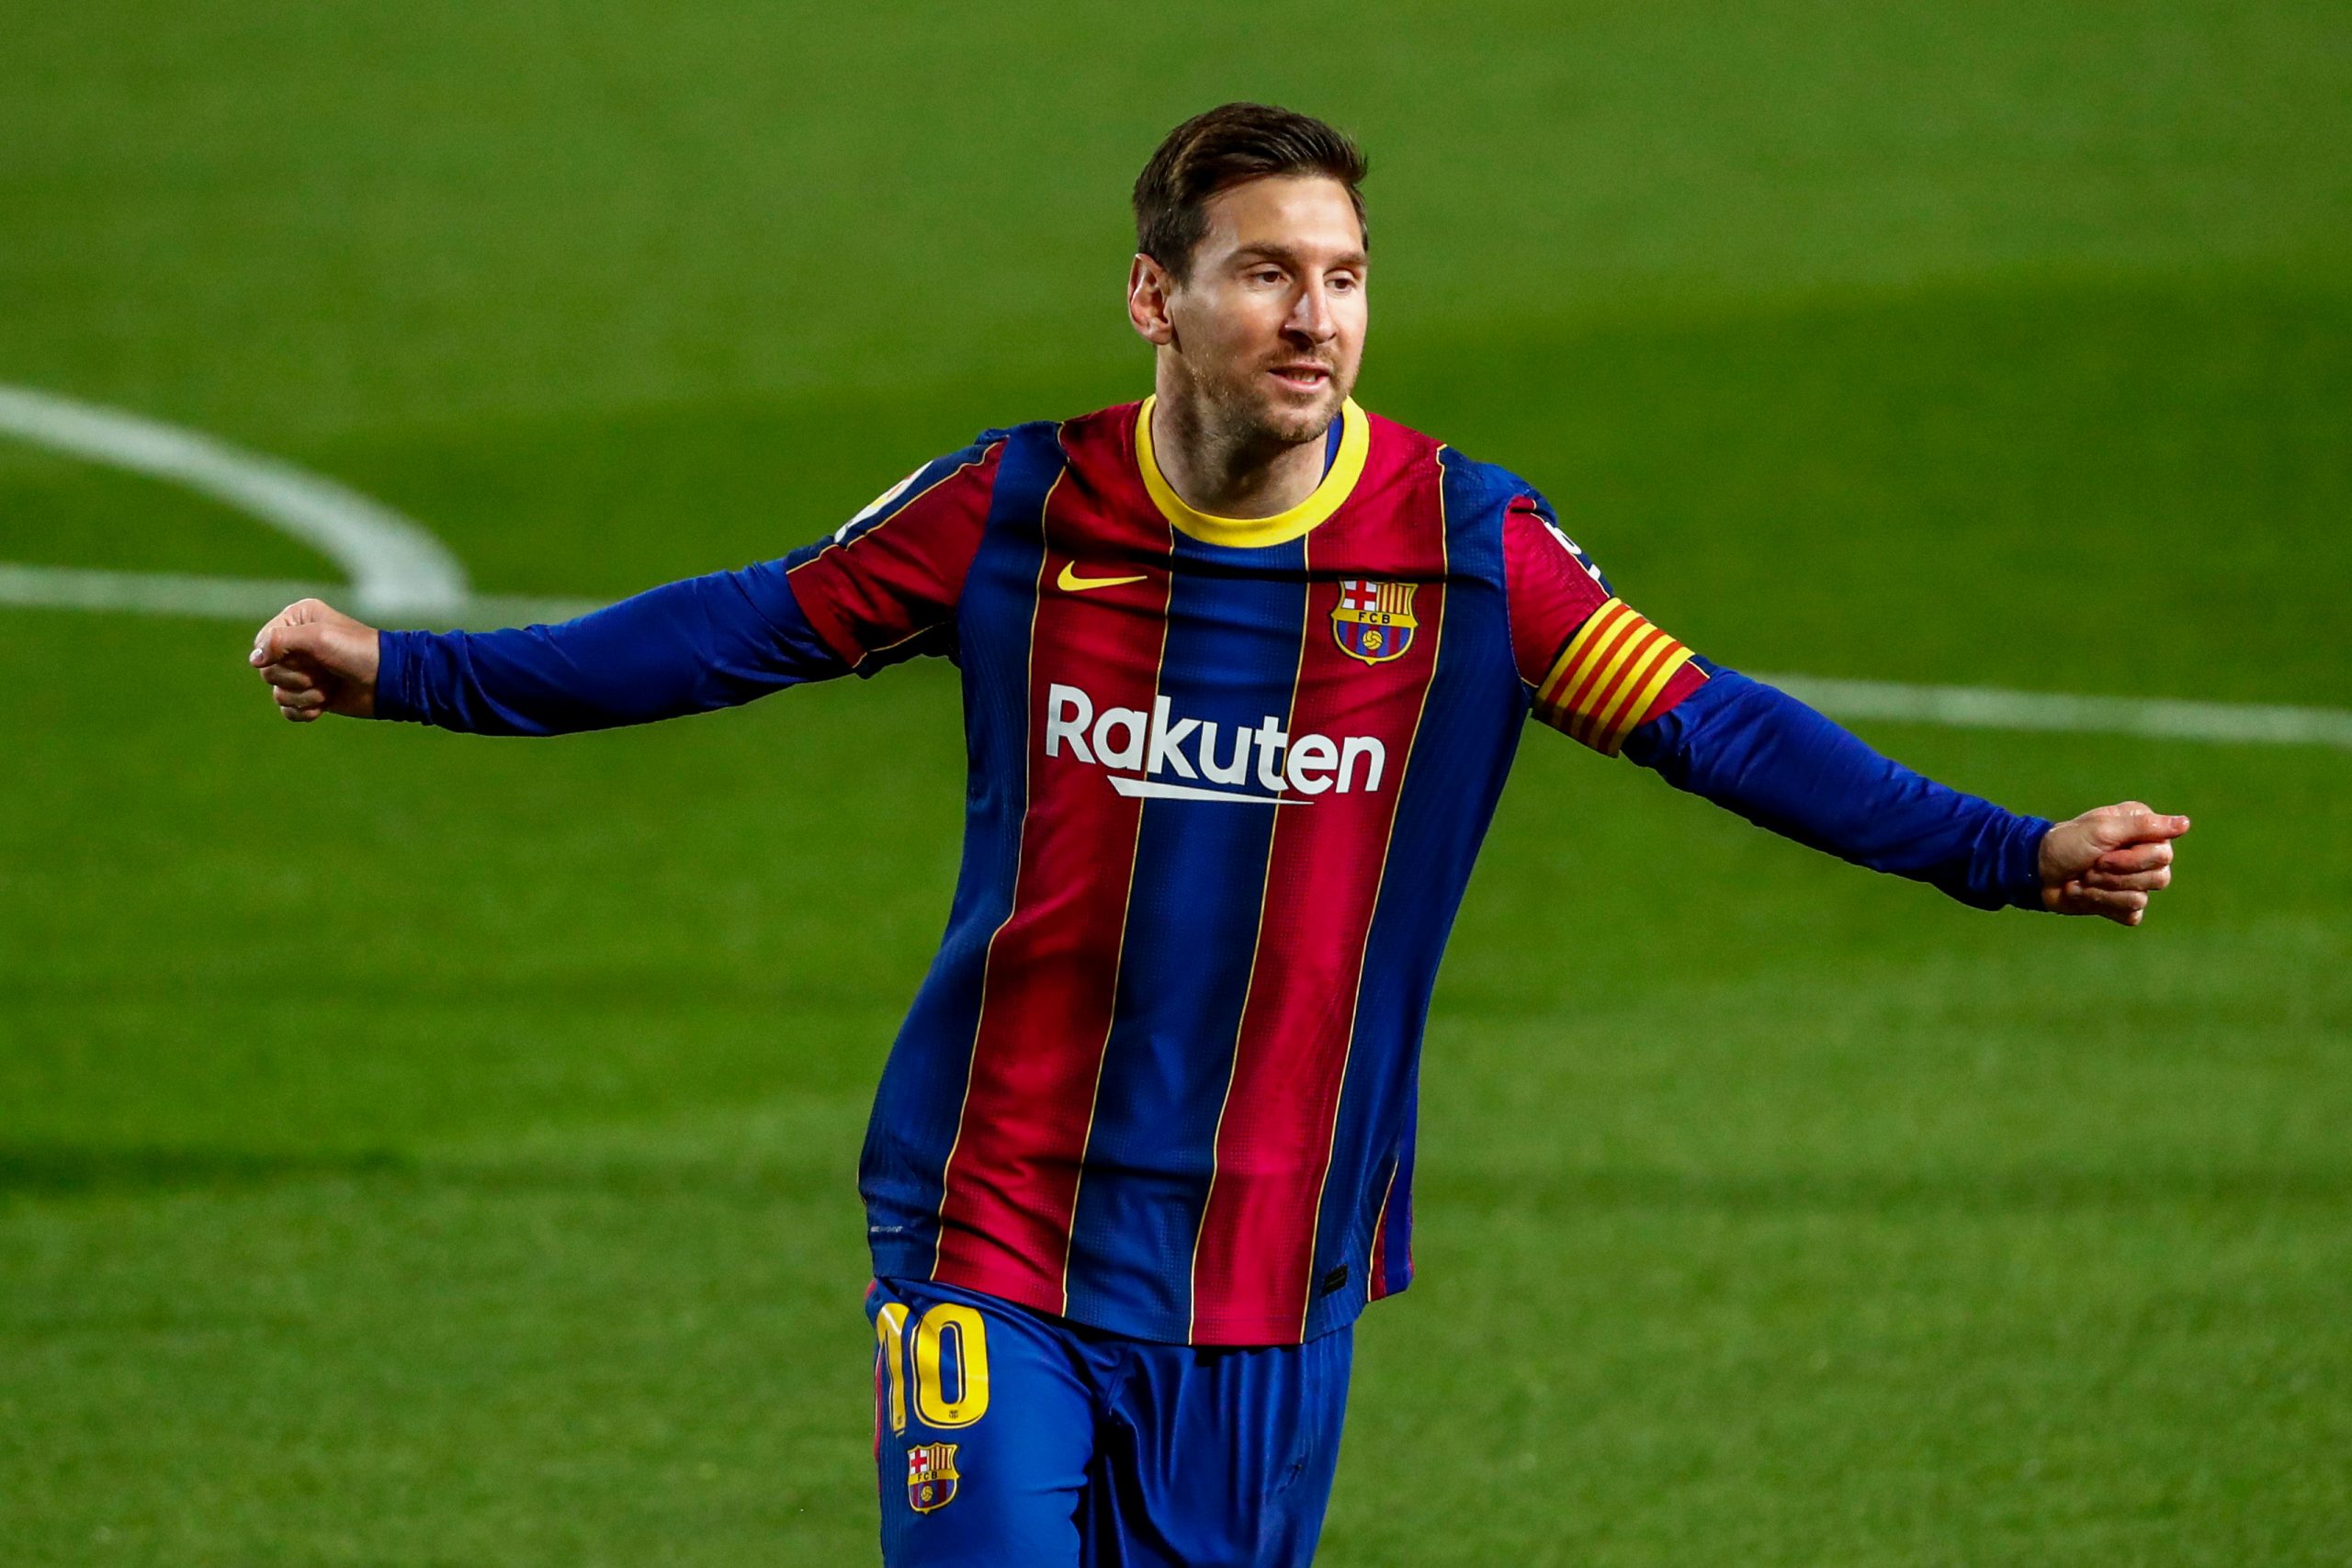 Welcome to the ‘Messiverse’: Footballer Lionel Messi launches NFT collection